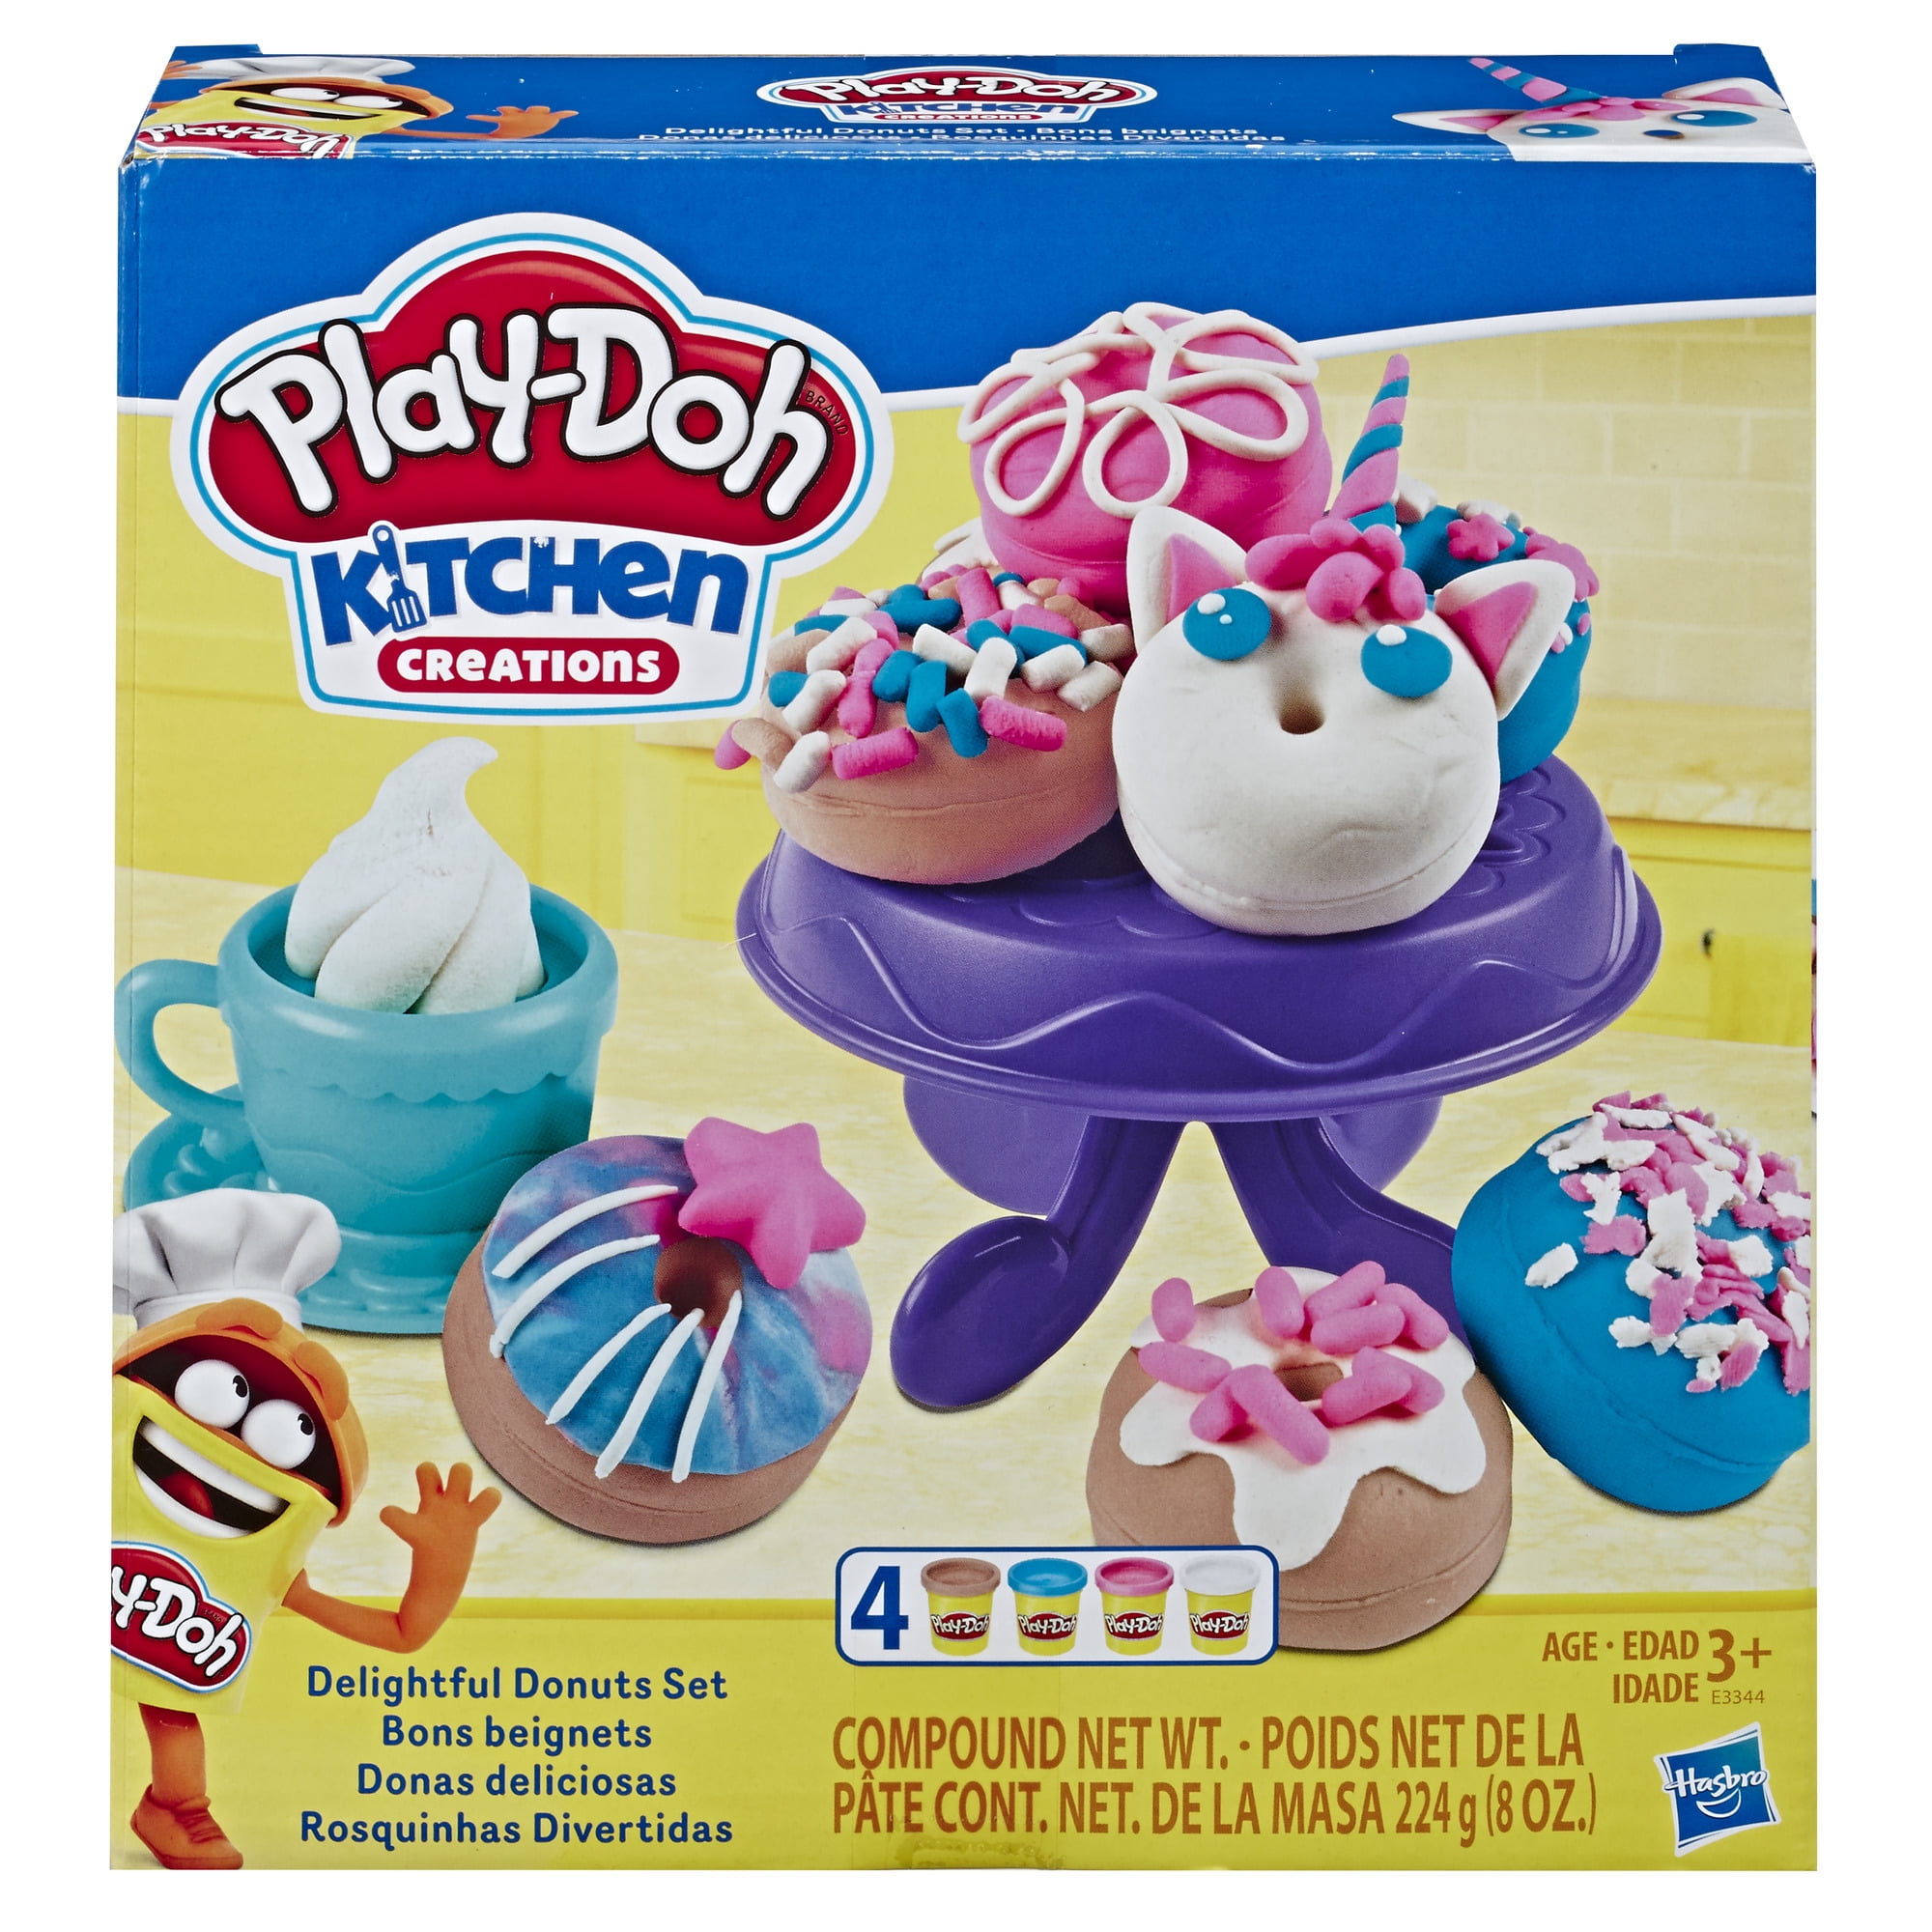 Play Doh Kitchen Creations Breakfast Bakery Fun Cooking Roleplay Toys For Kids 